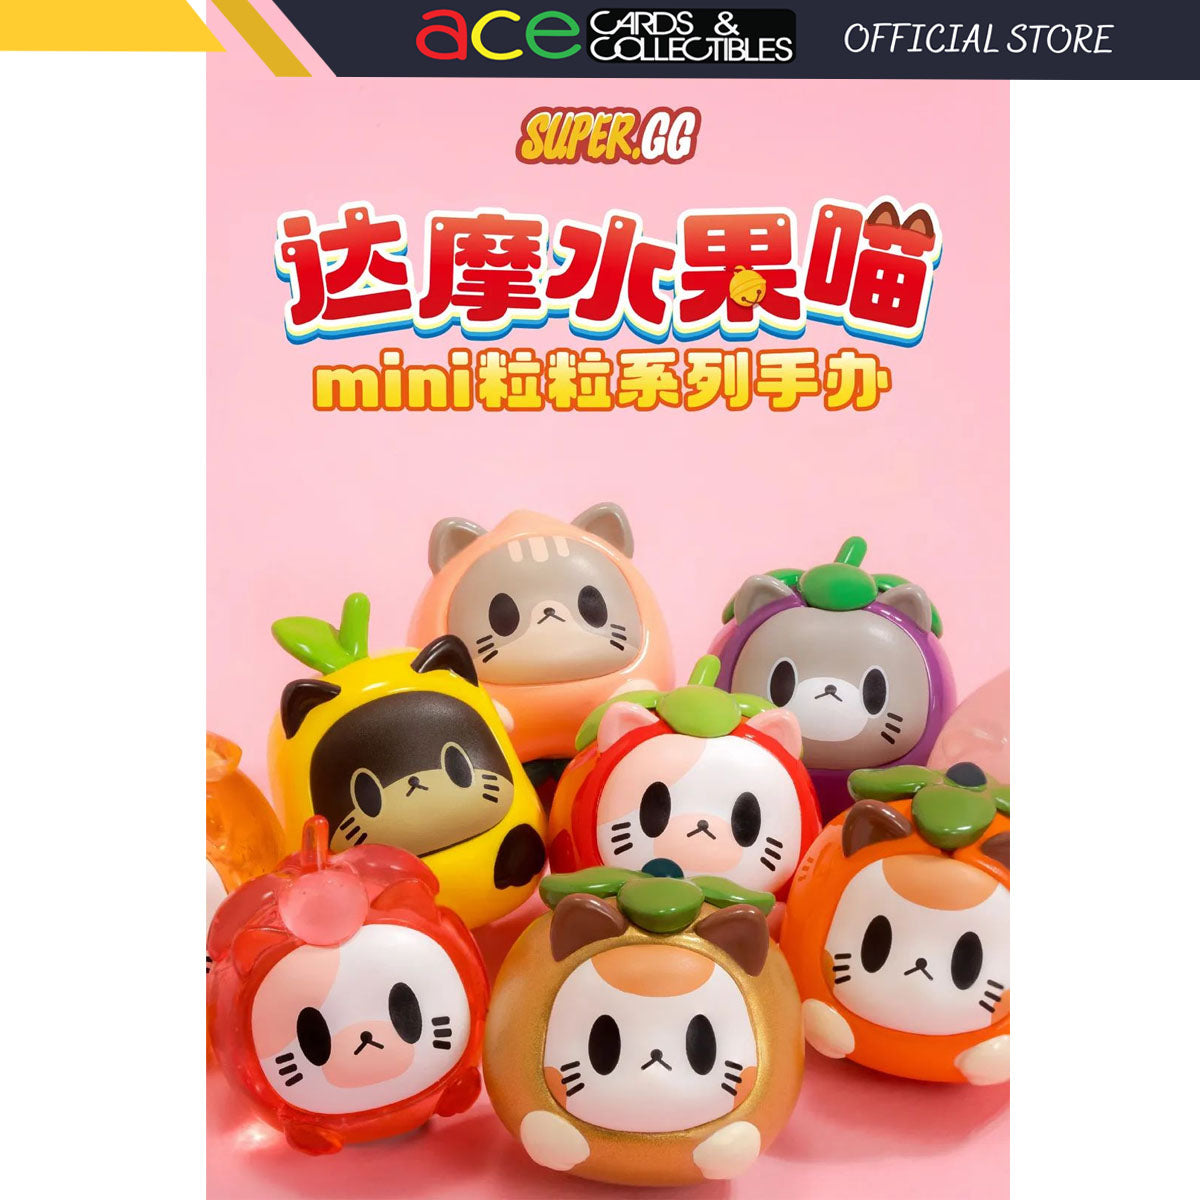 Super GG Fruit Cat Mini Dharma Mystery Bag Series-Display Box (12pcs)-Super GG-Ace Cards & Collectibles